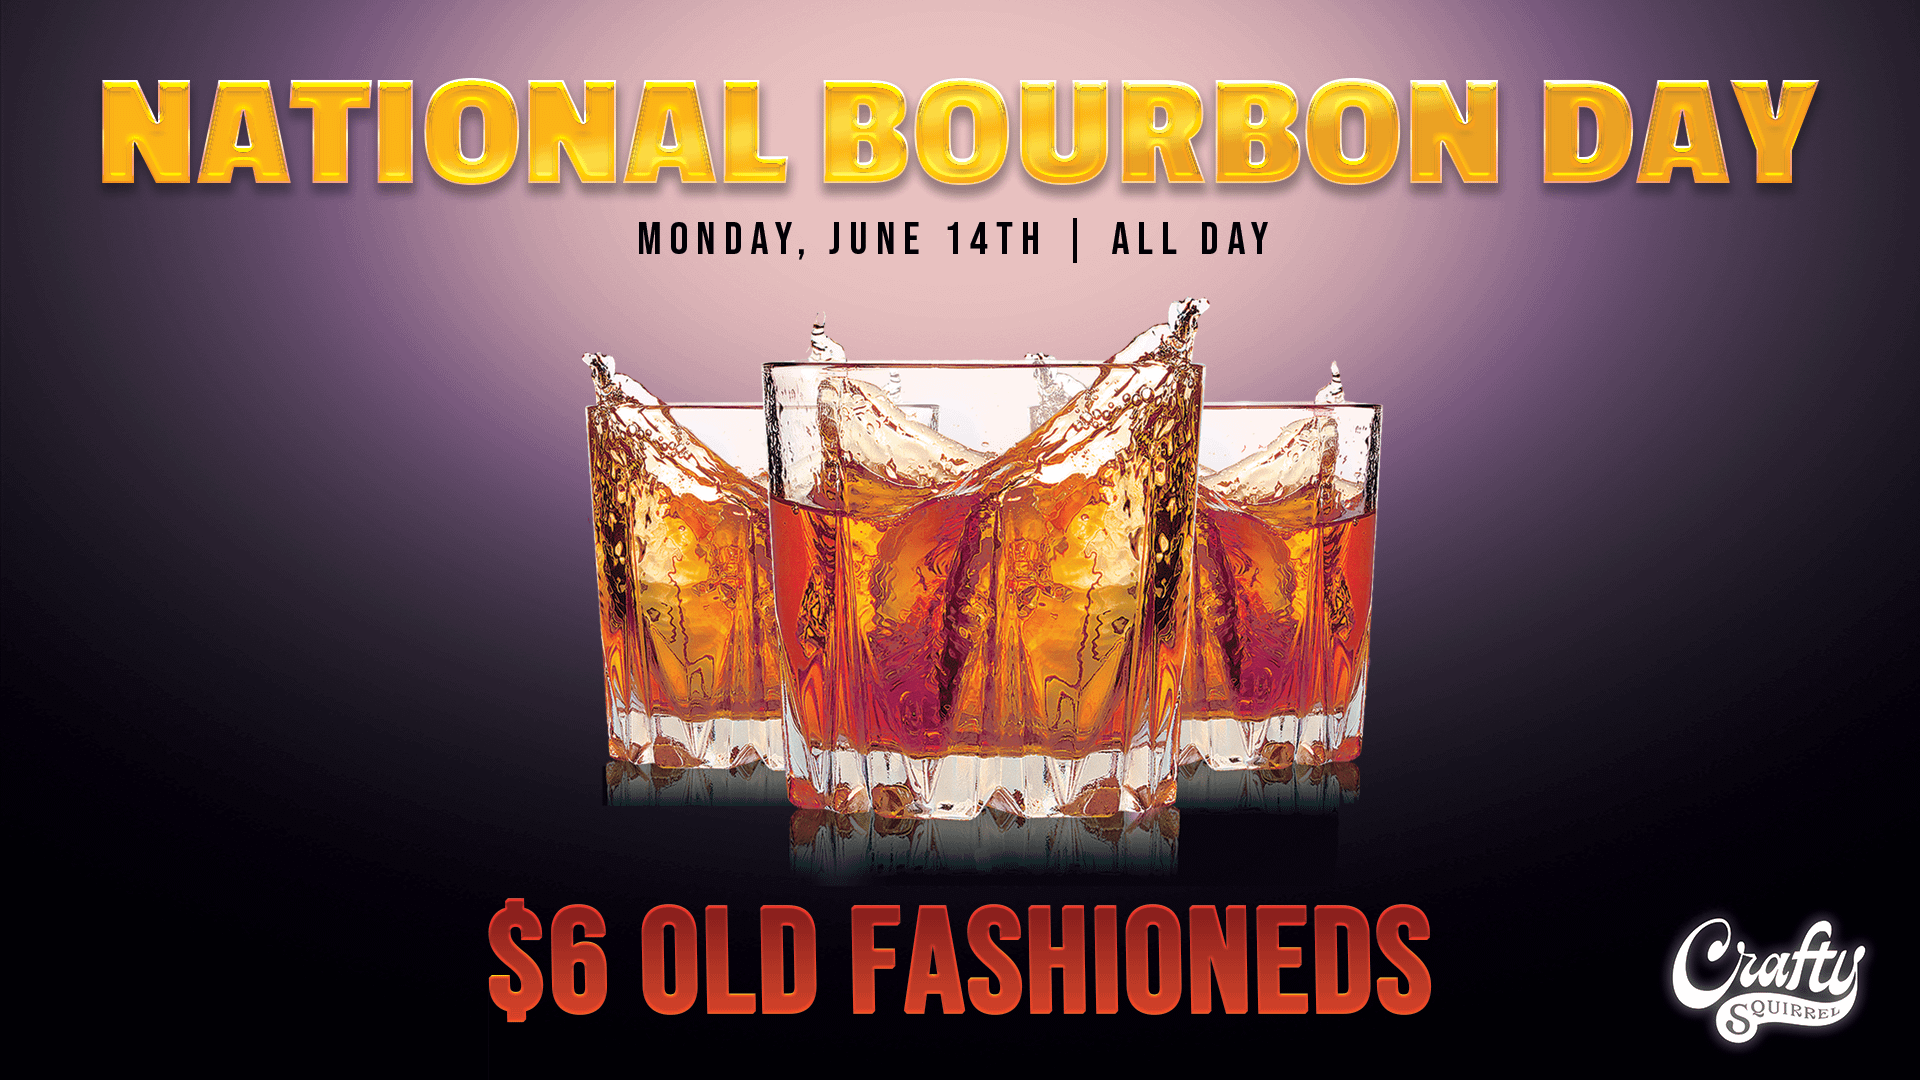 National Bourbon Day at the Crafty Squirrel